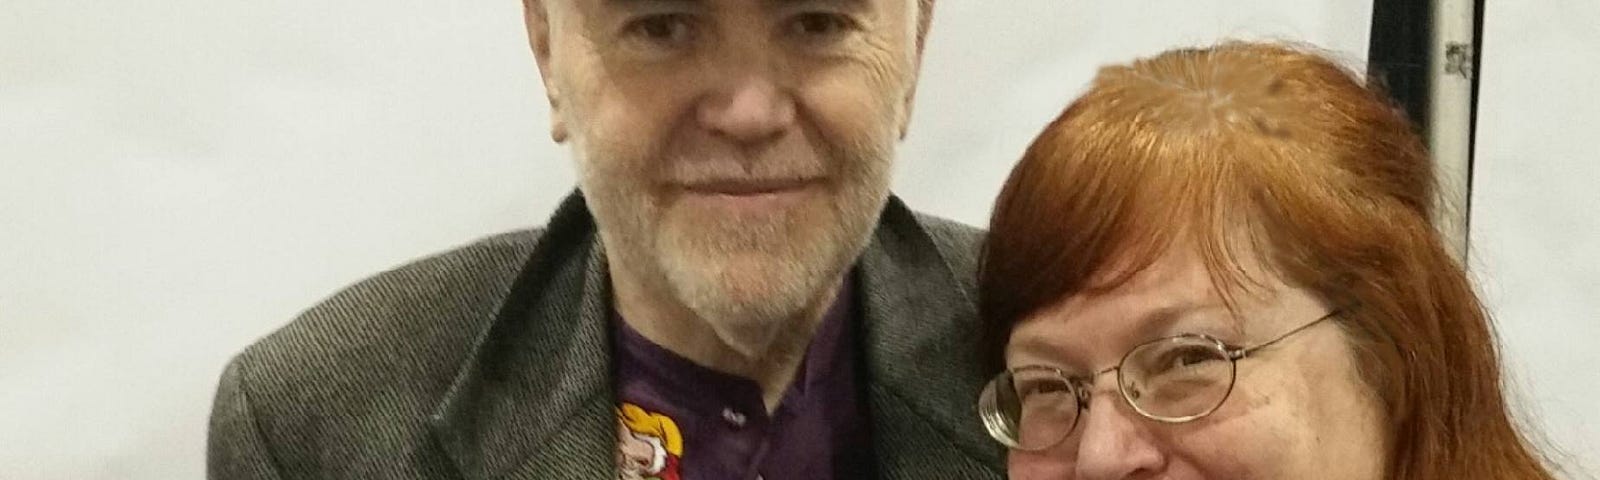 A photo of the actor Walter Koenig and the author at a convention.